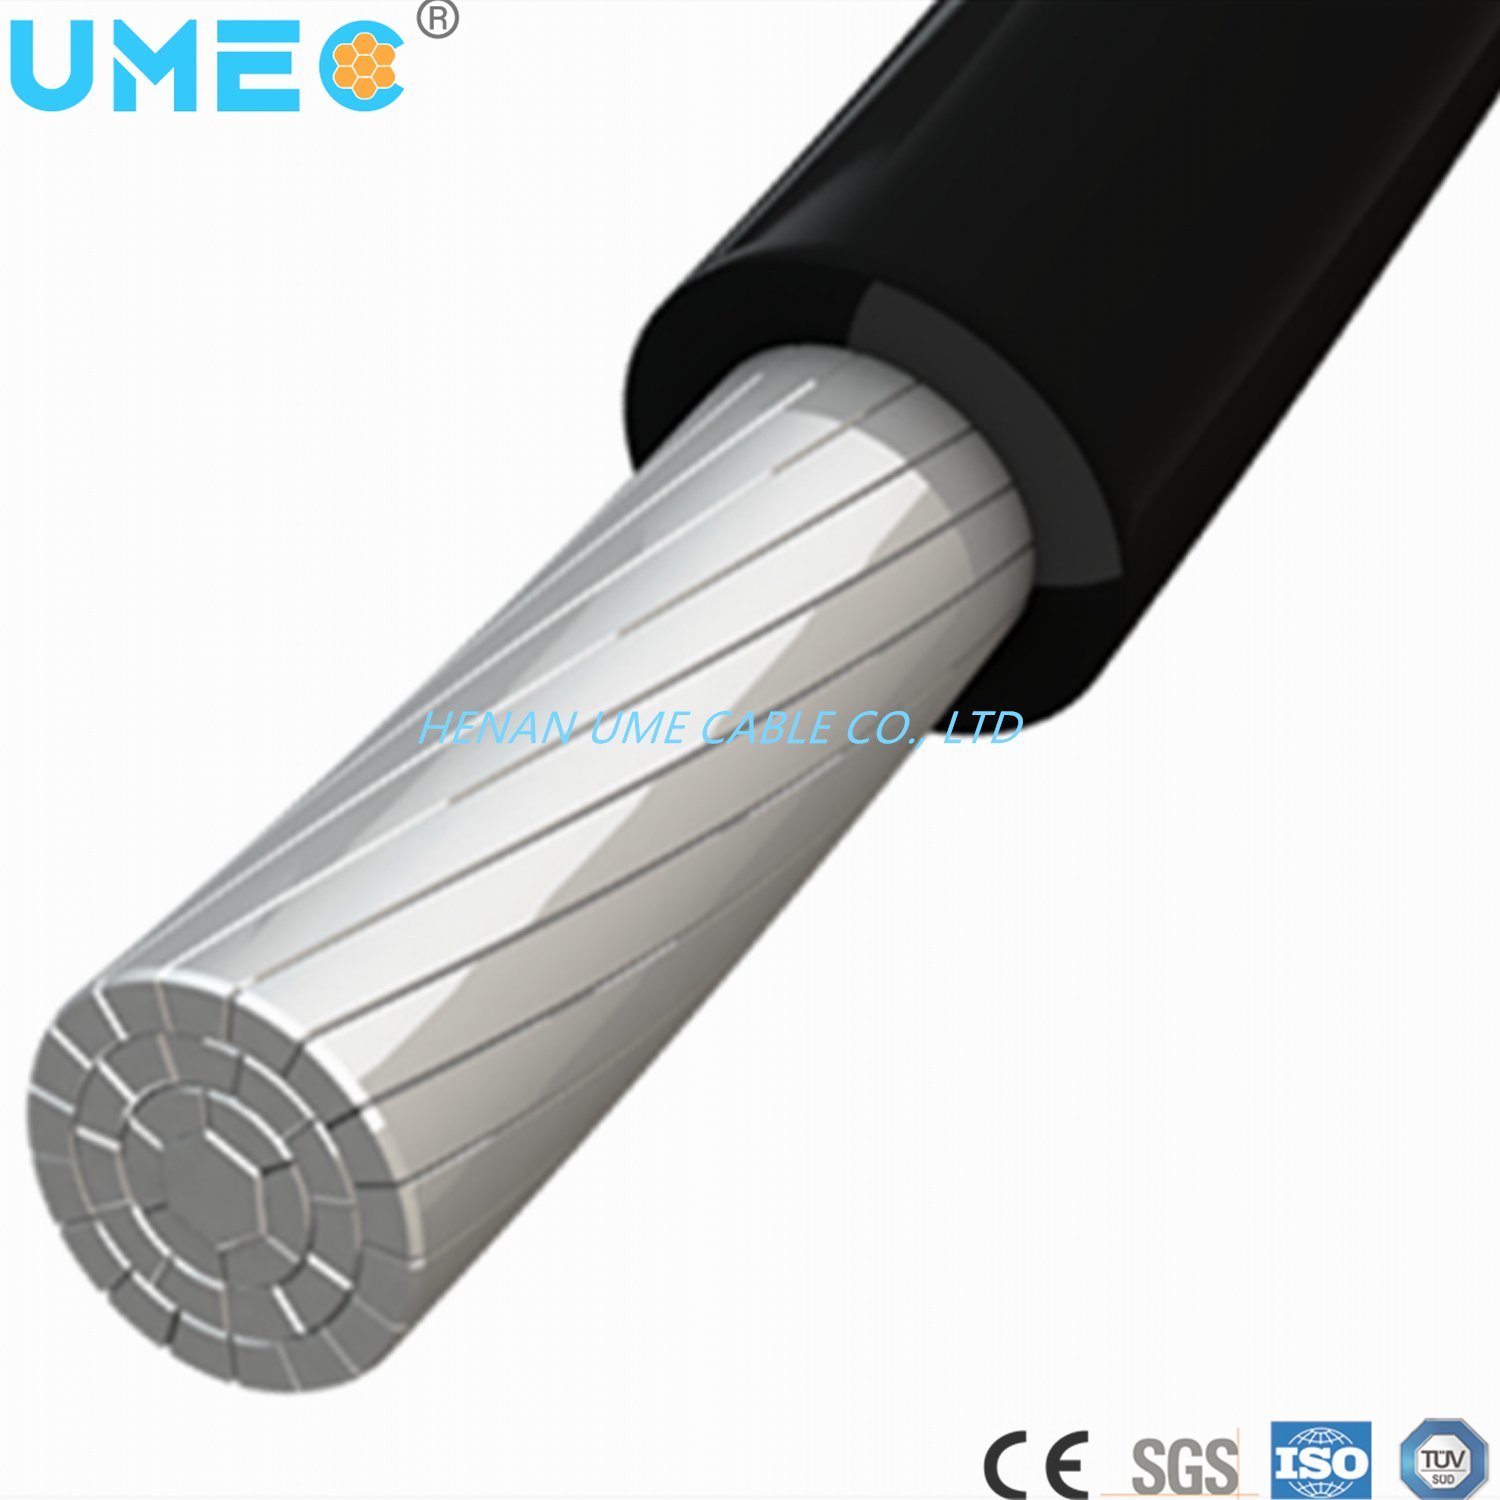 Underground Service Entrance Cable Copper Rhh Rhw-2 Use-2